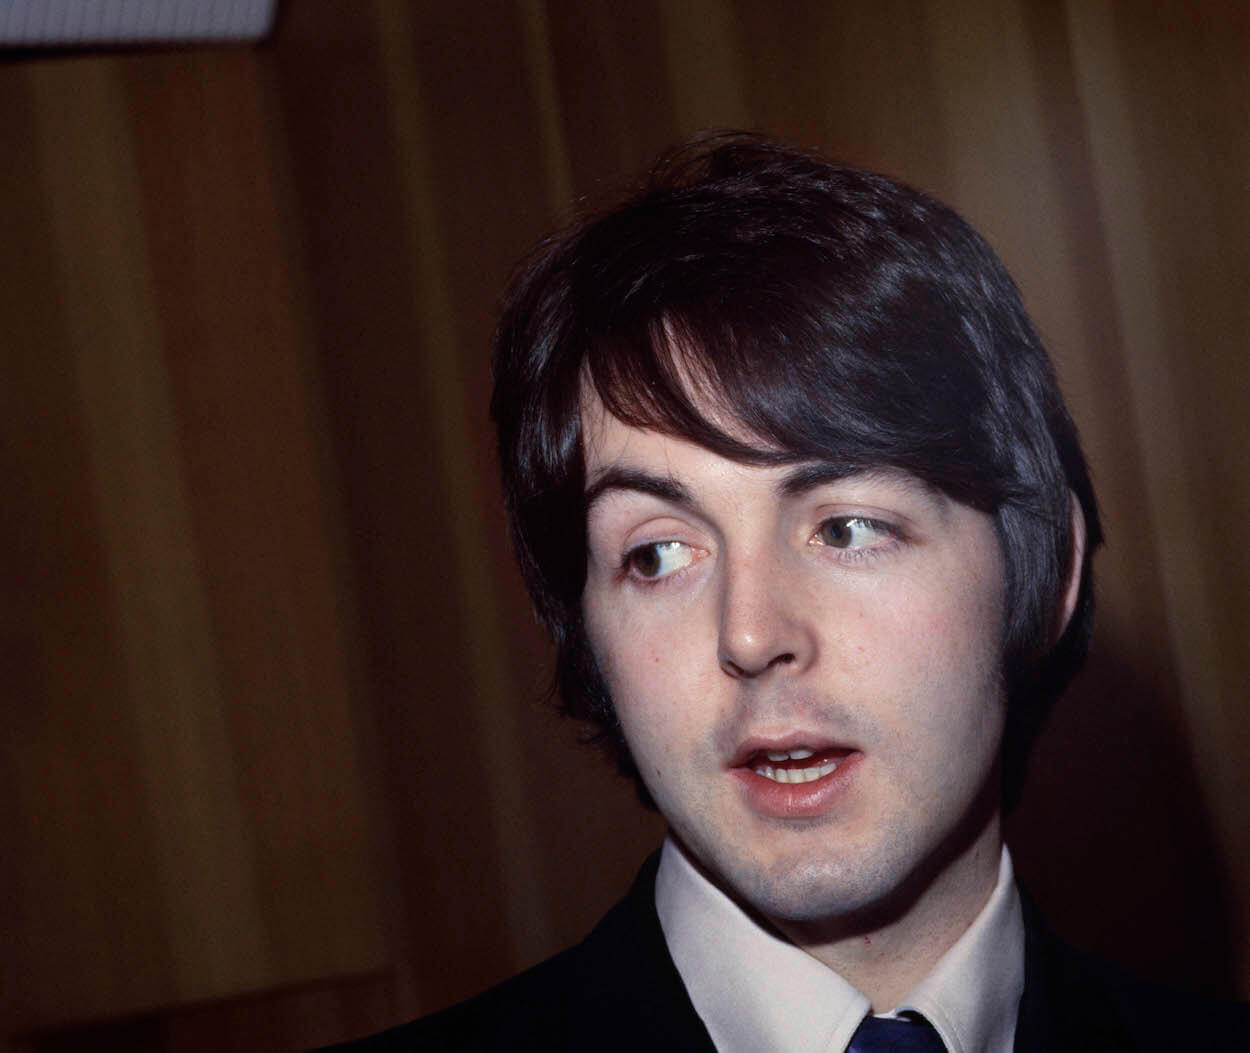 Paul McCartney looking off to his side during a 1968 press conference.